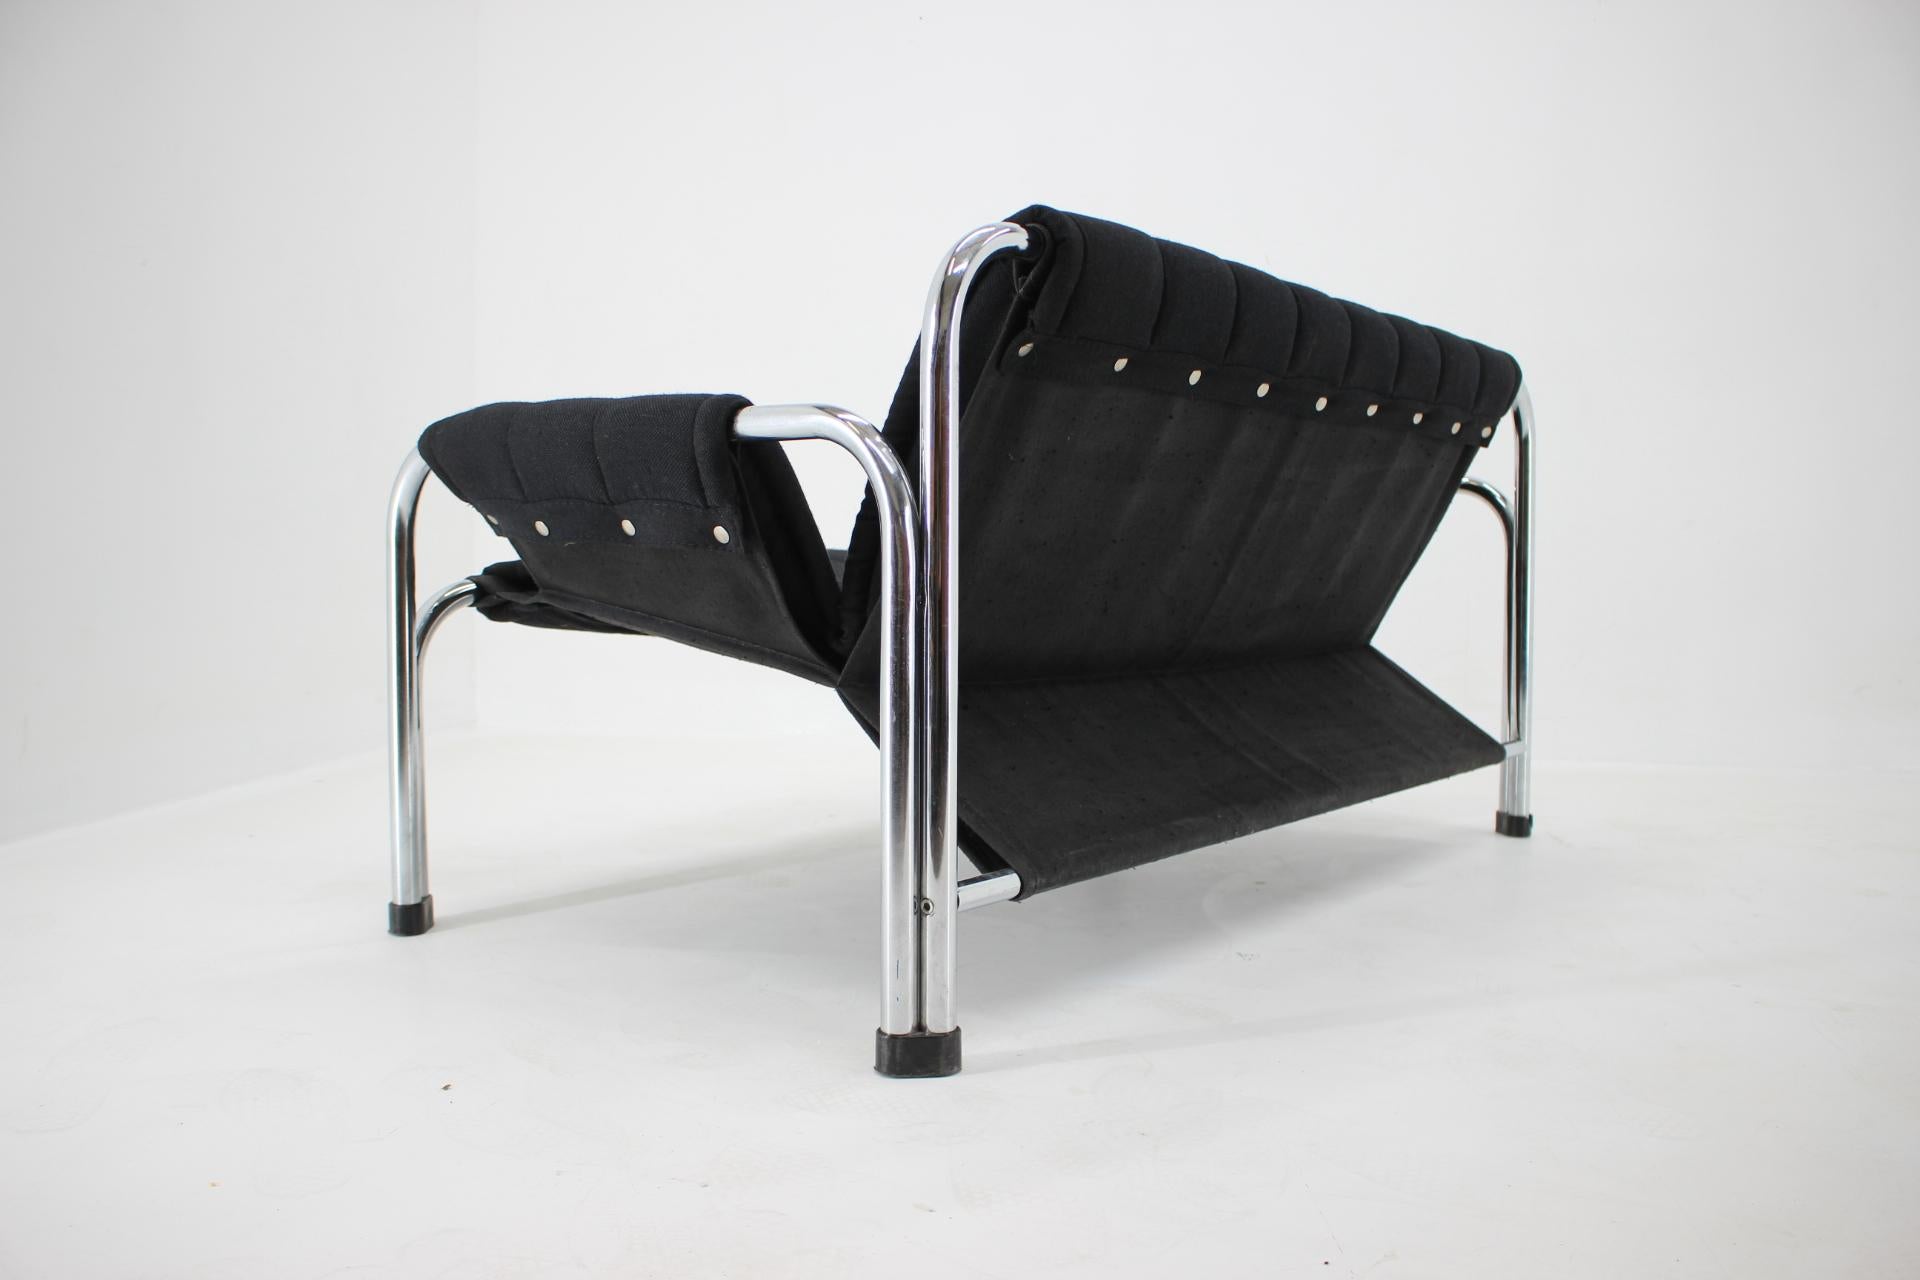 Metal Midcentury Chrome Sofa Designed by Viliam Chlebo, 1980s